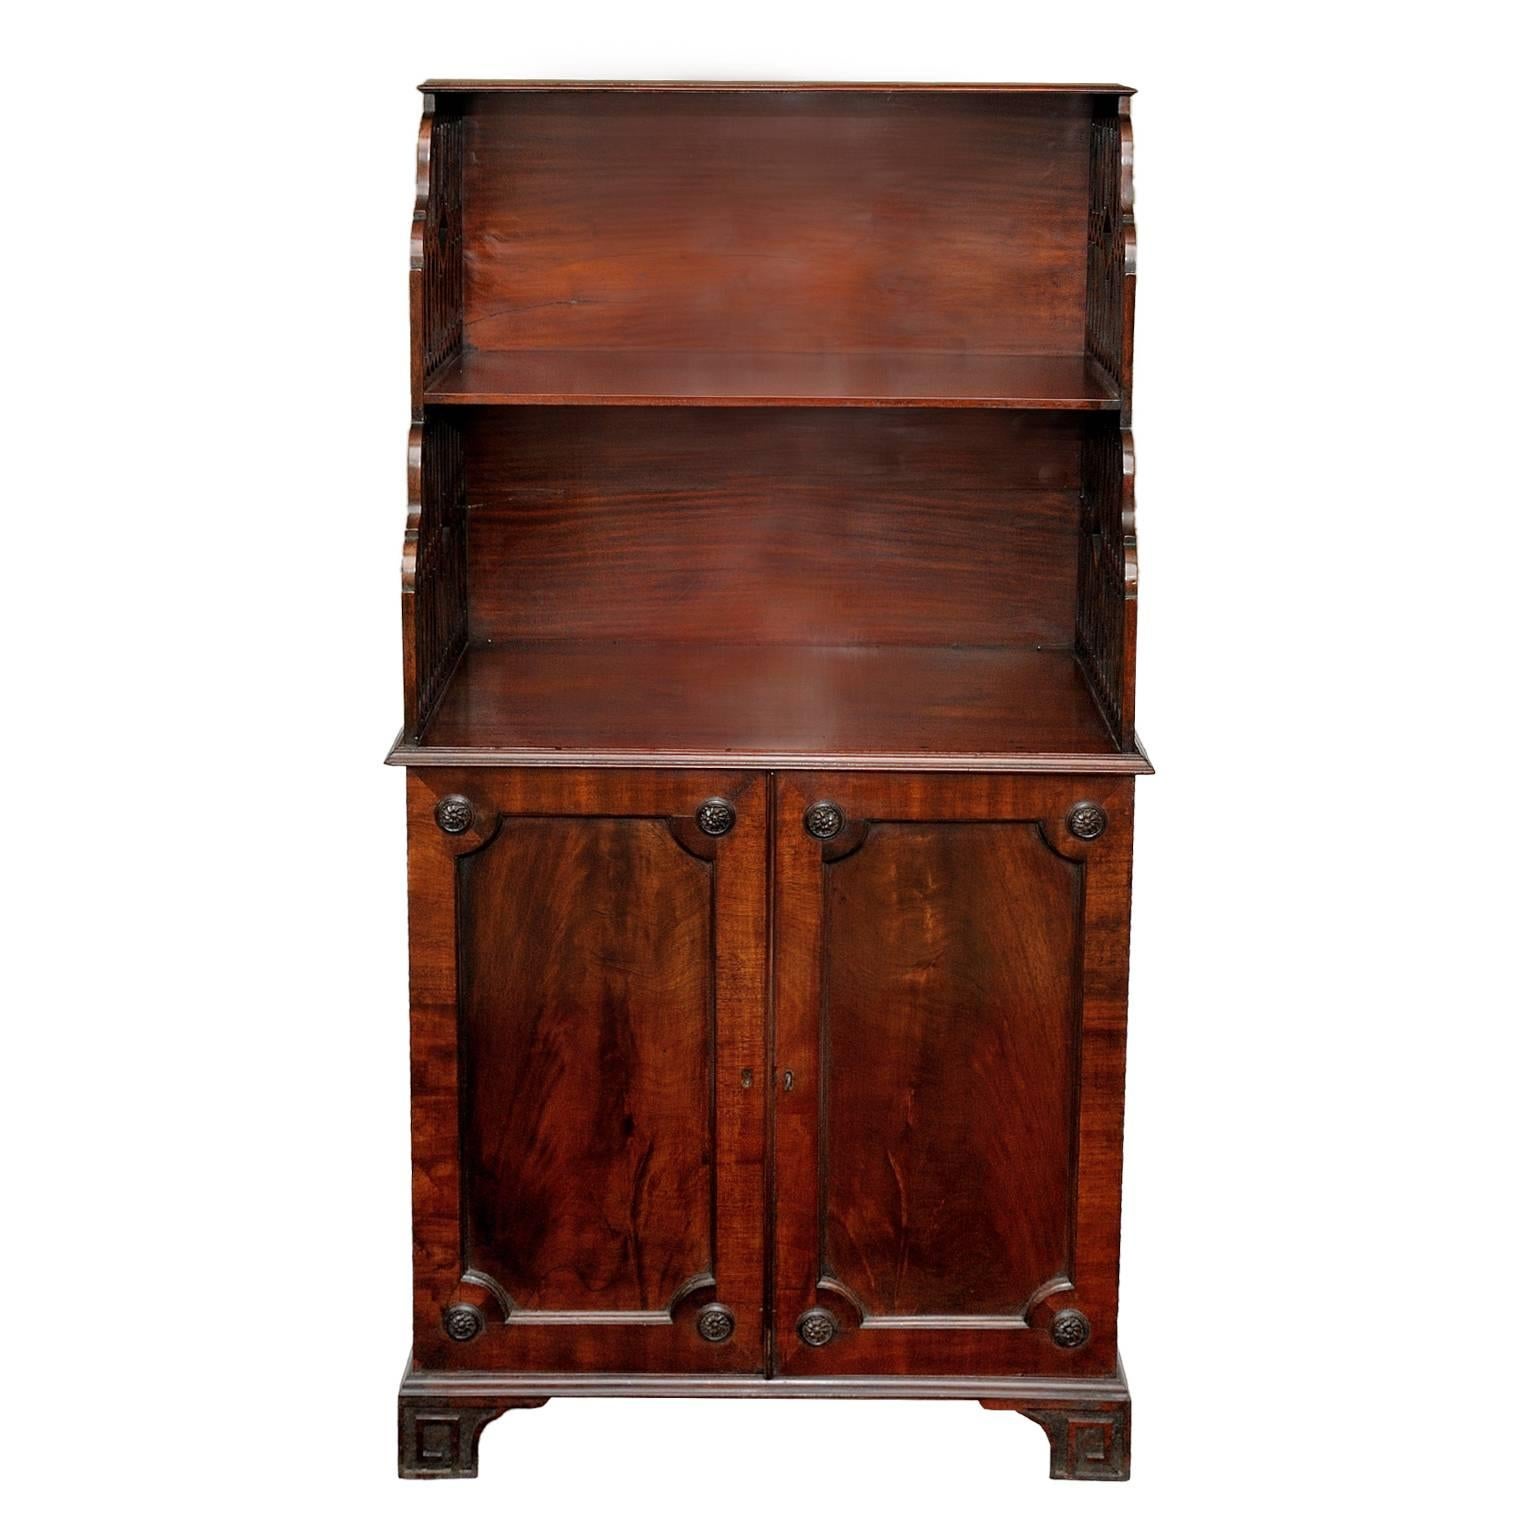 This is a fine example of an English late 18th century George III mahogany Side Cabinet, with fretted shelves above and felt covered interior cabinet shelves, circa 1780.

A lovely piece of very useful proportions.
 